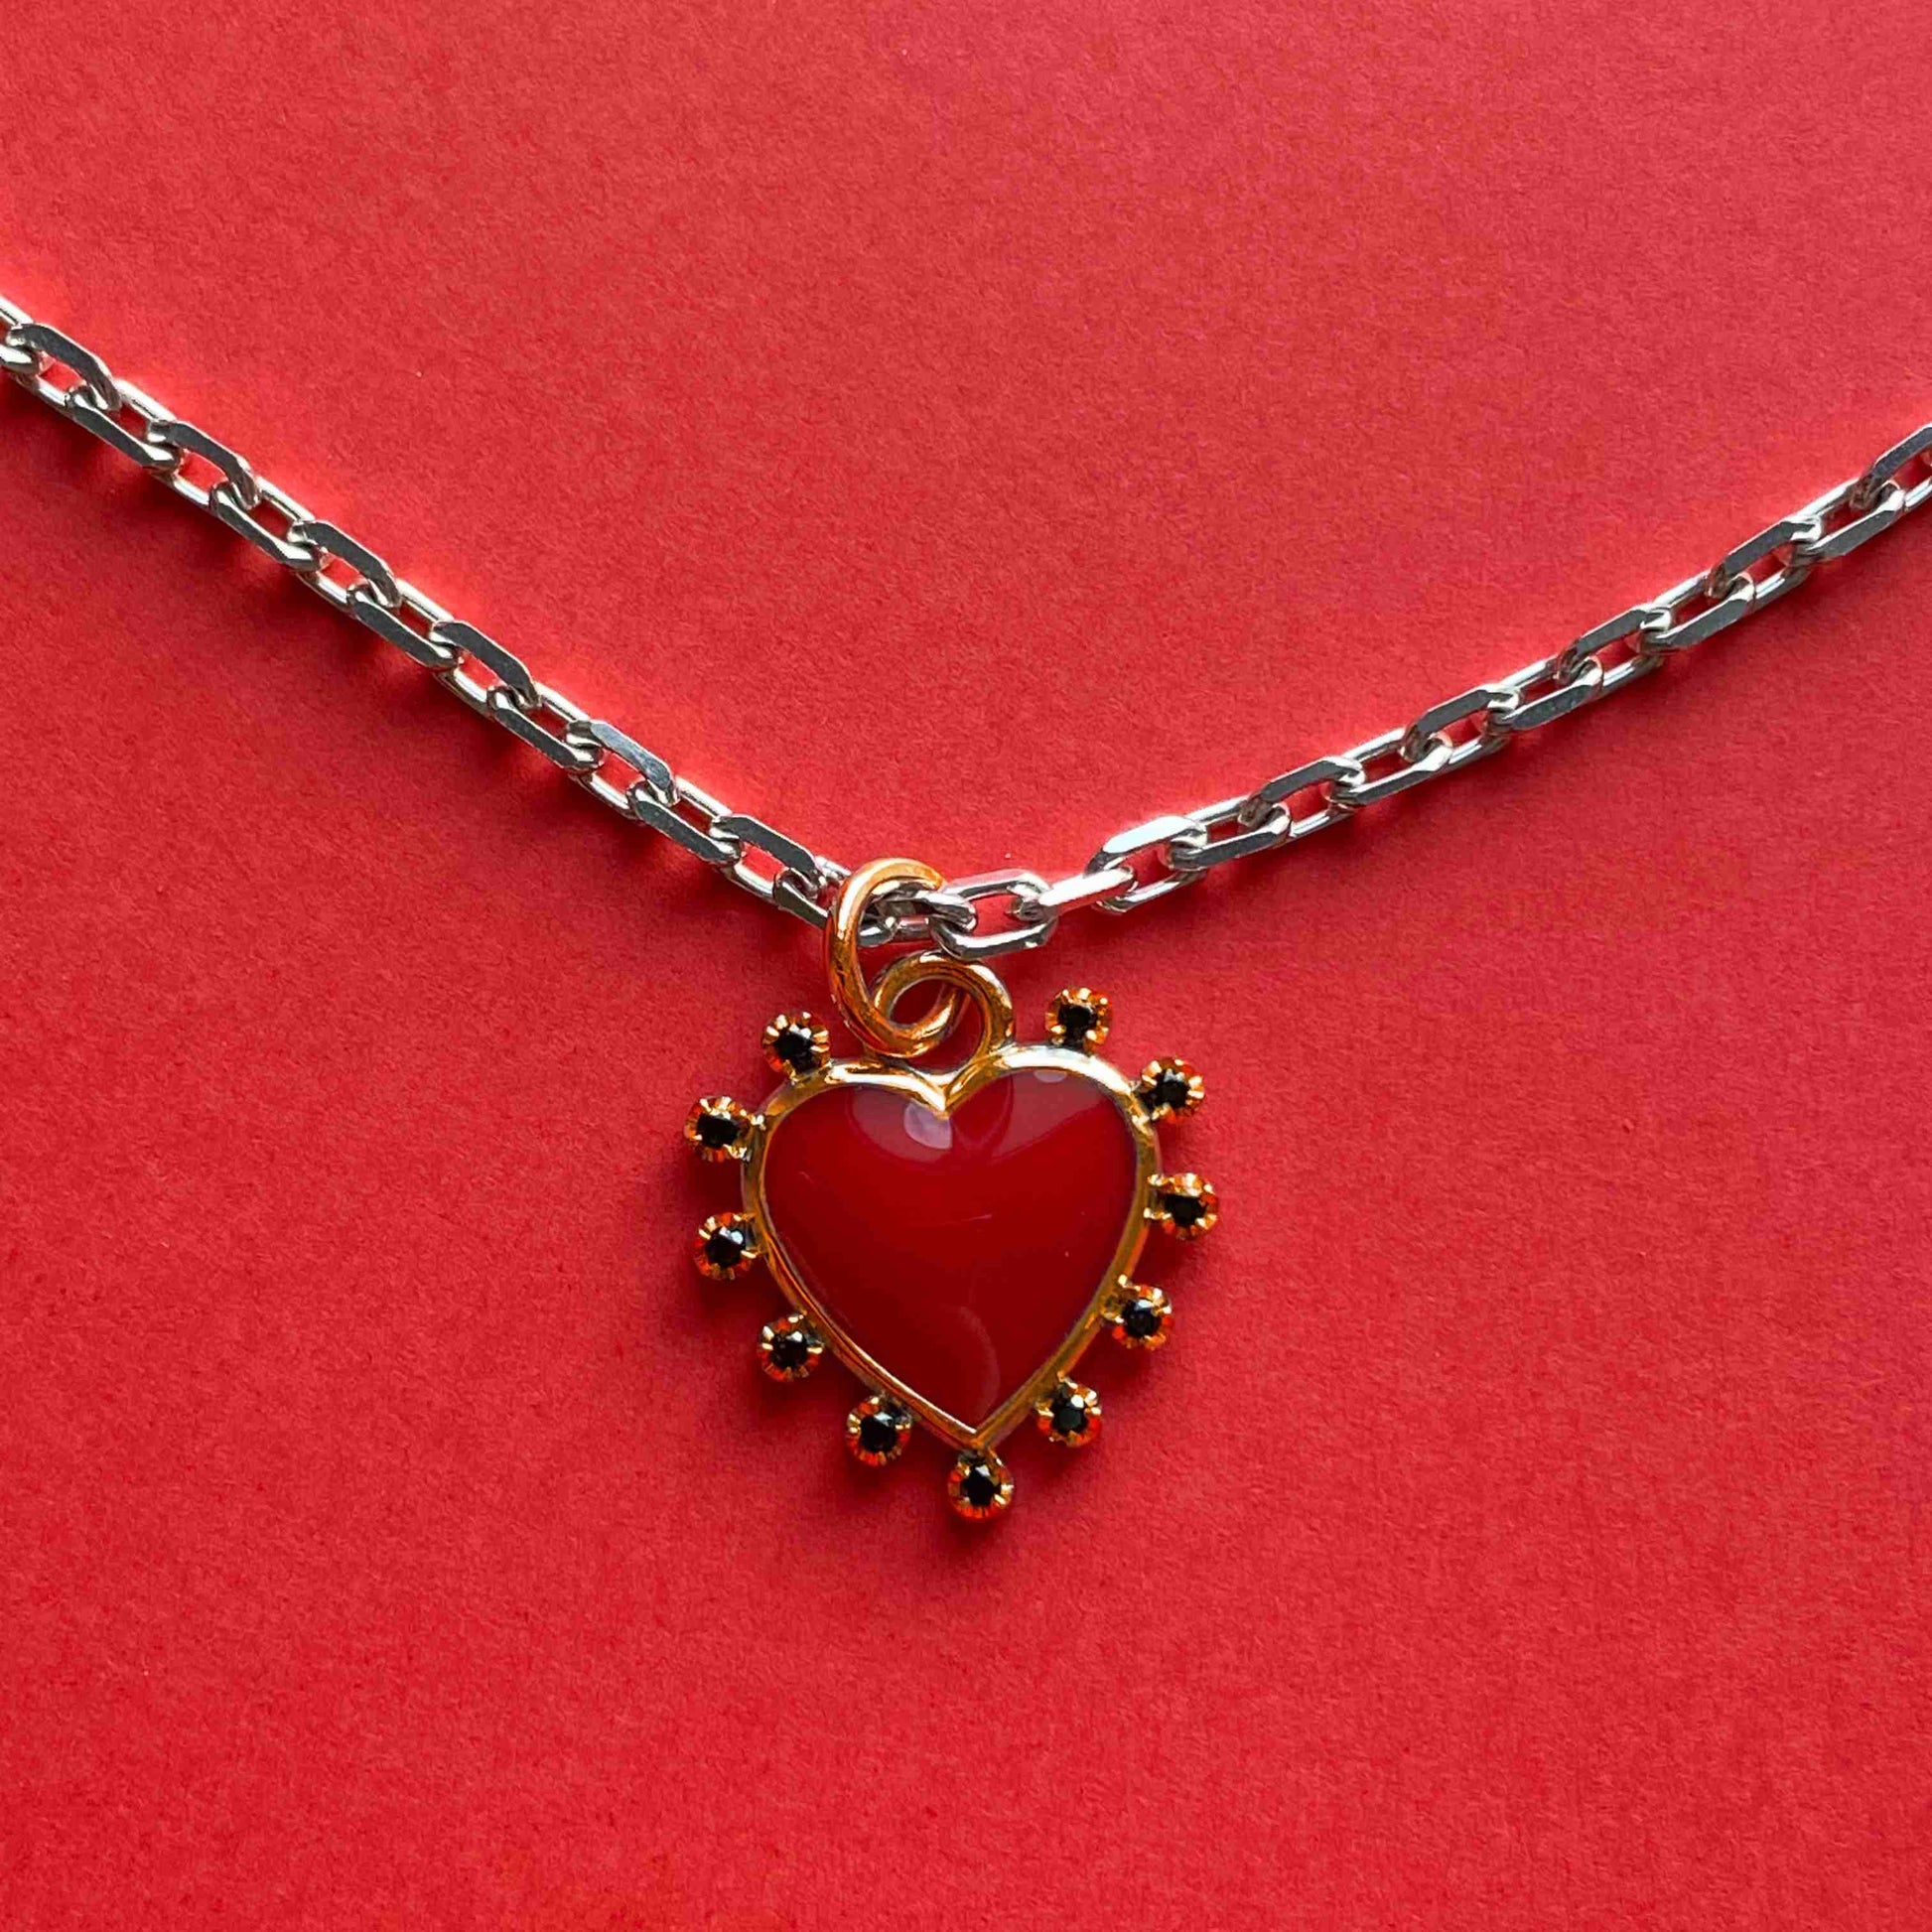 PENDANT "HEART" WITH ENAMEL & BLACK DIAMONDS ON A SILVER CHAIN / SOLID GOLD